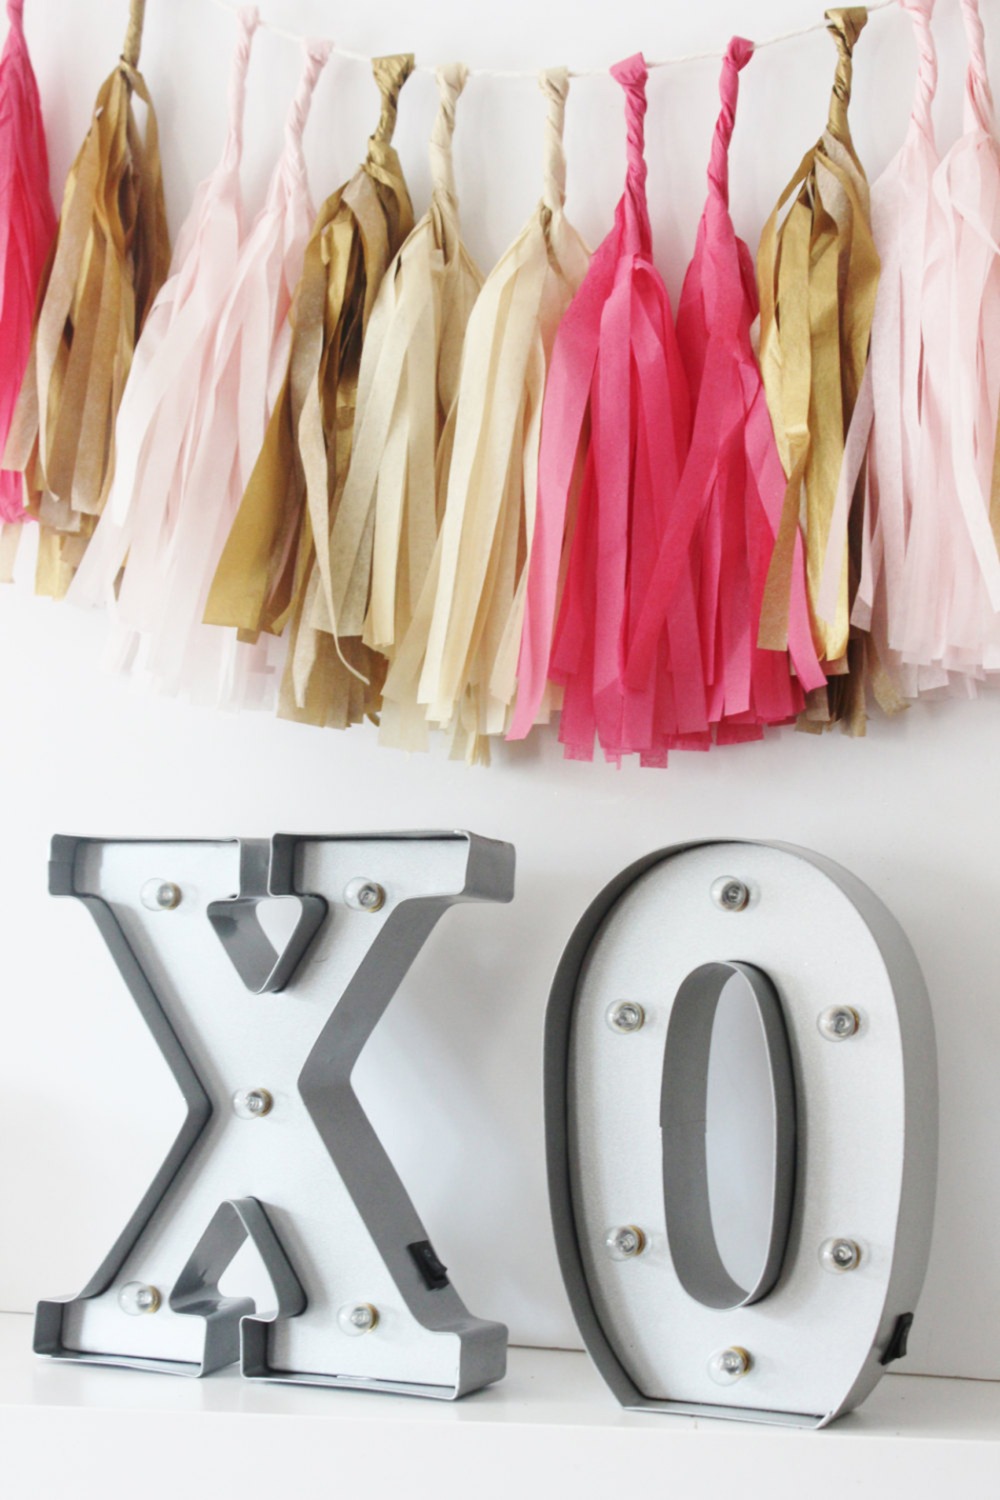 xo light up marquee sign